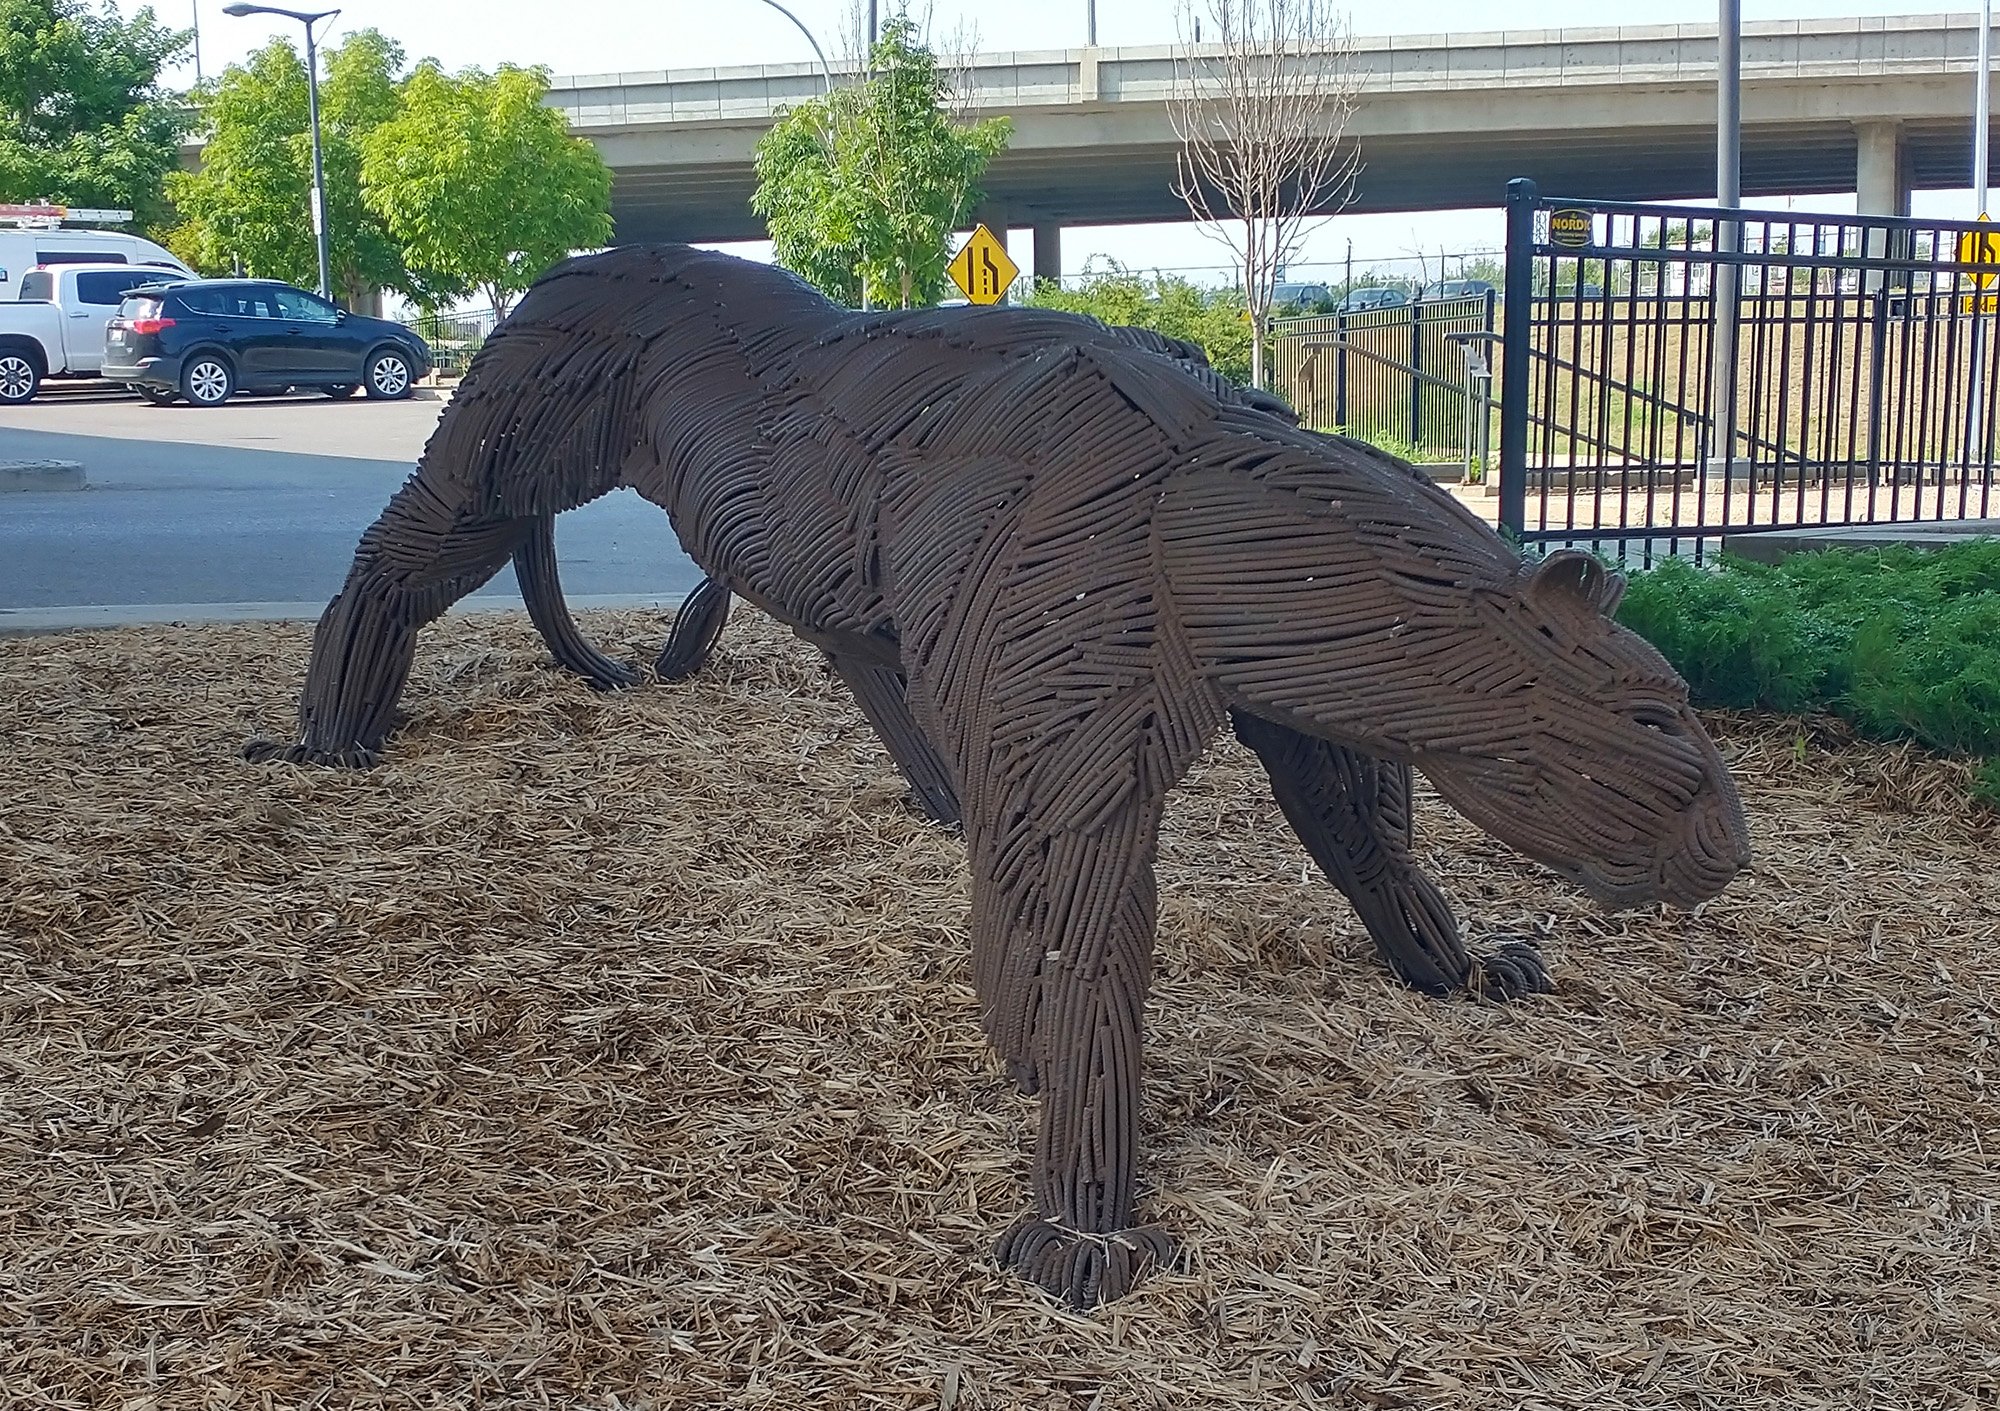 Wire Tiger, again along the bike path. Bike paths are slow garbage for getting around but they're great for taking pictures of cool stuff.